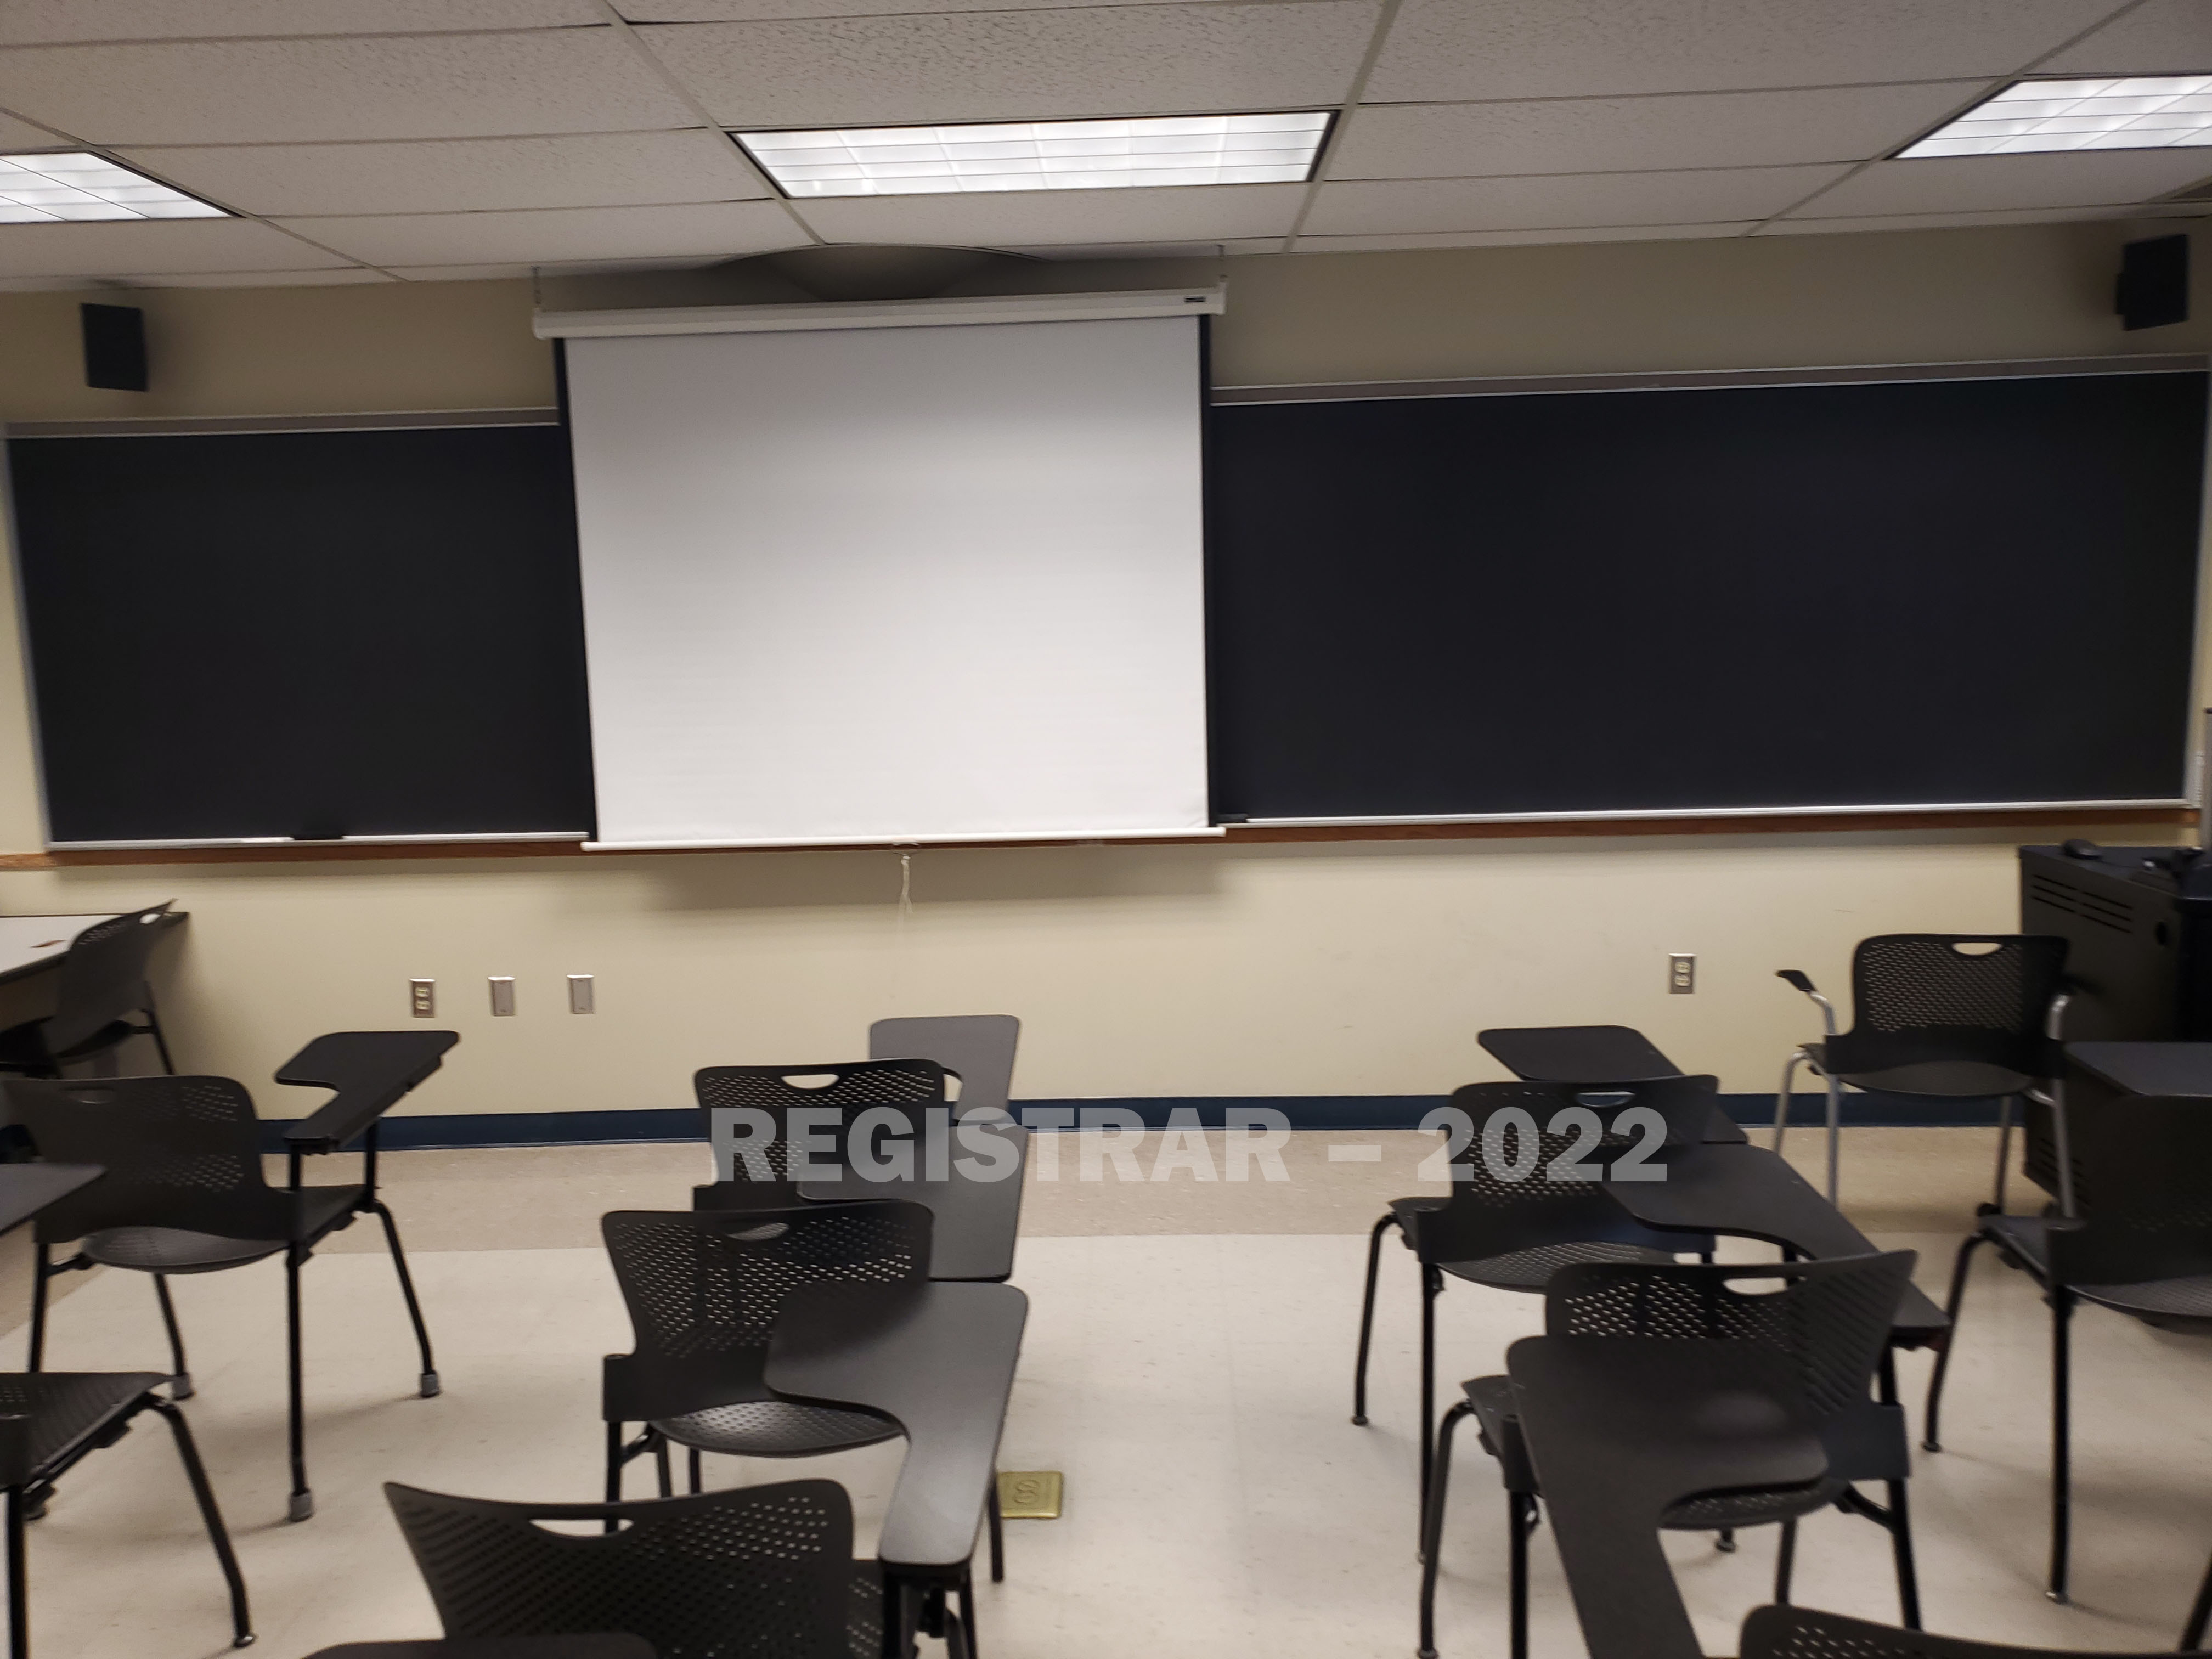 Enarson Classroom Building room 206 view from the back of the room with projector screen down